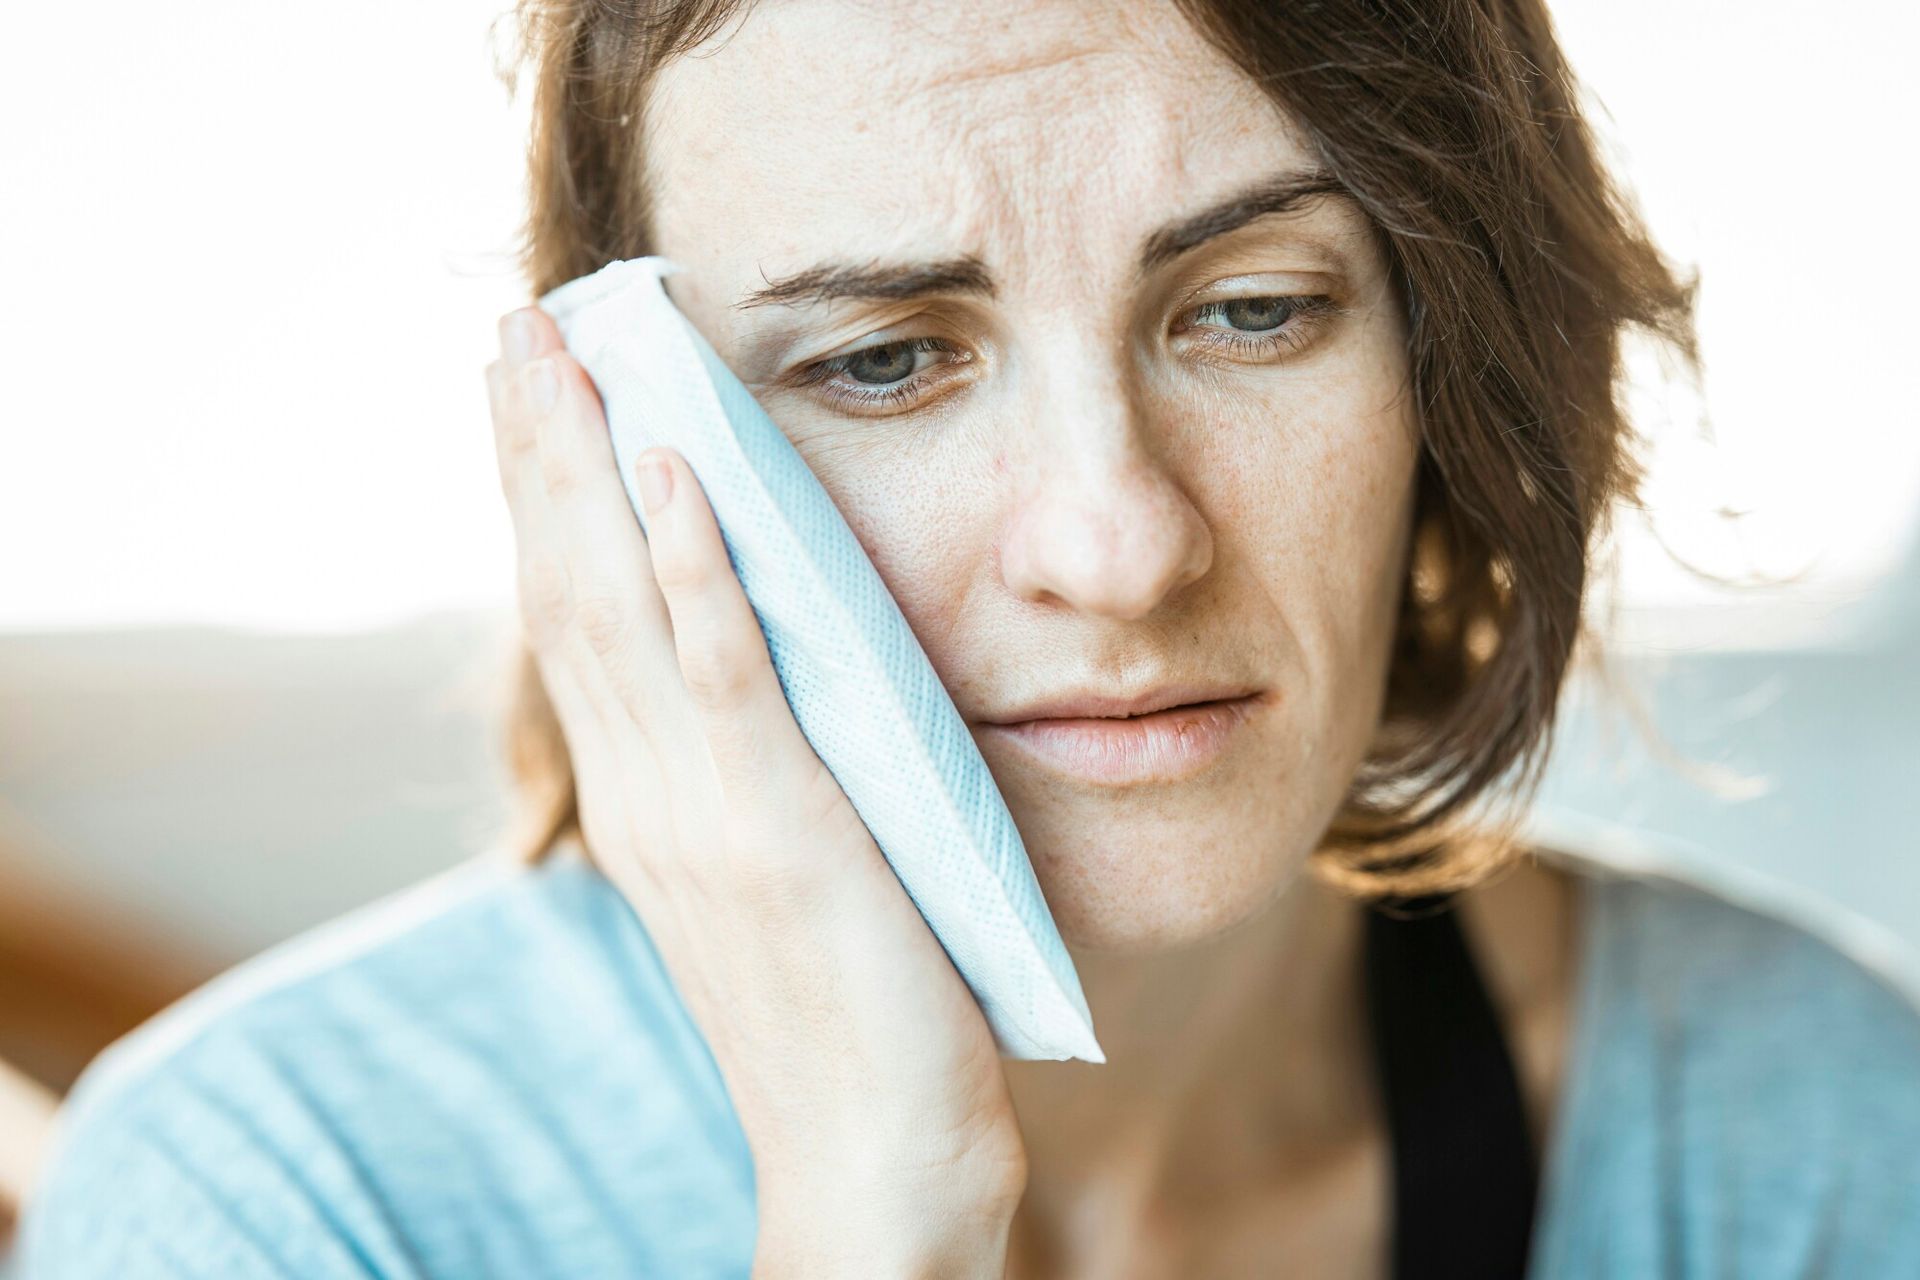 a woman has a toothache and is holding a towel to her face